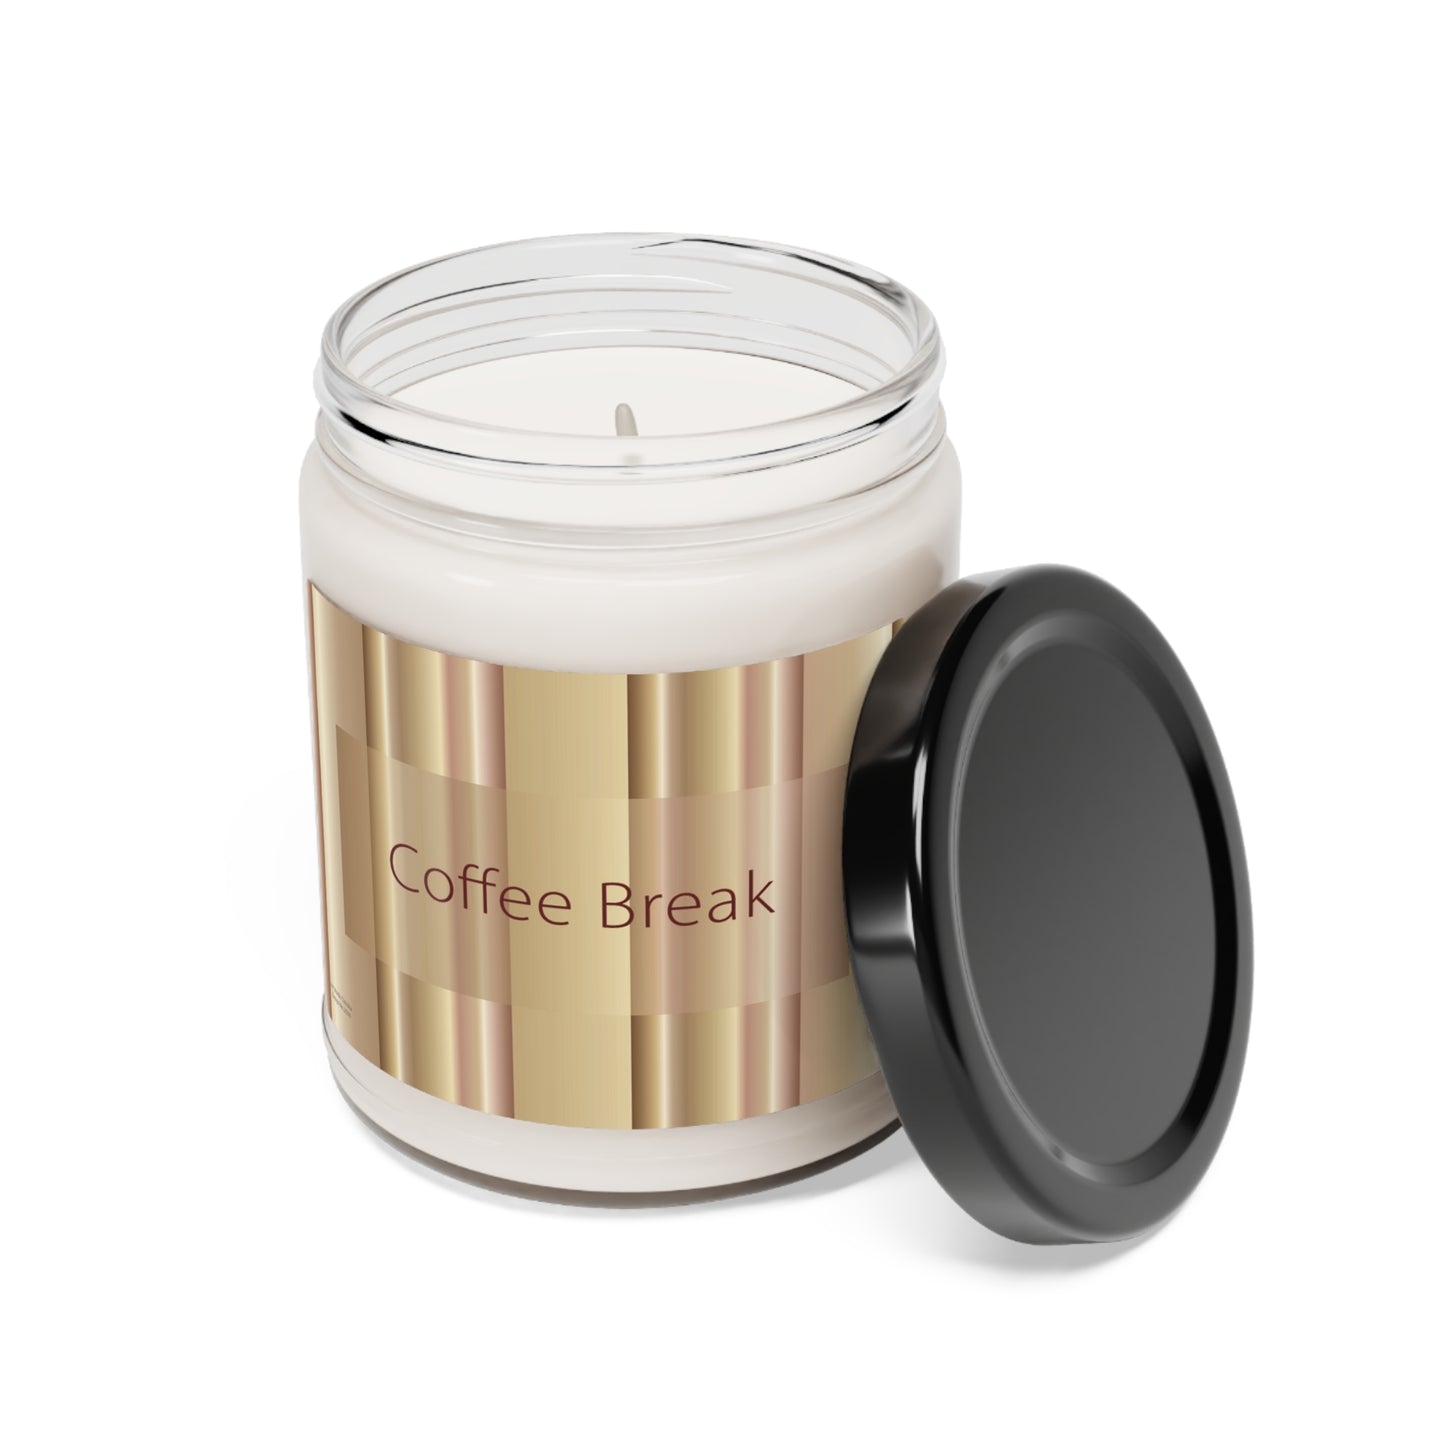 Scented Soy Candle, 9oz Coffee Break - Design No.2000